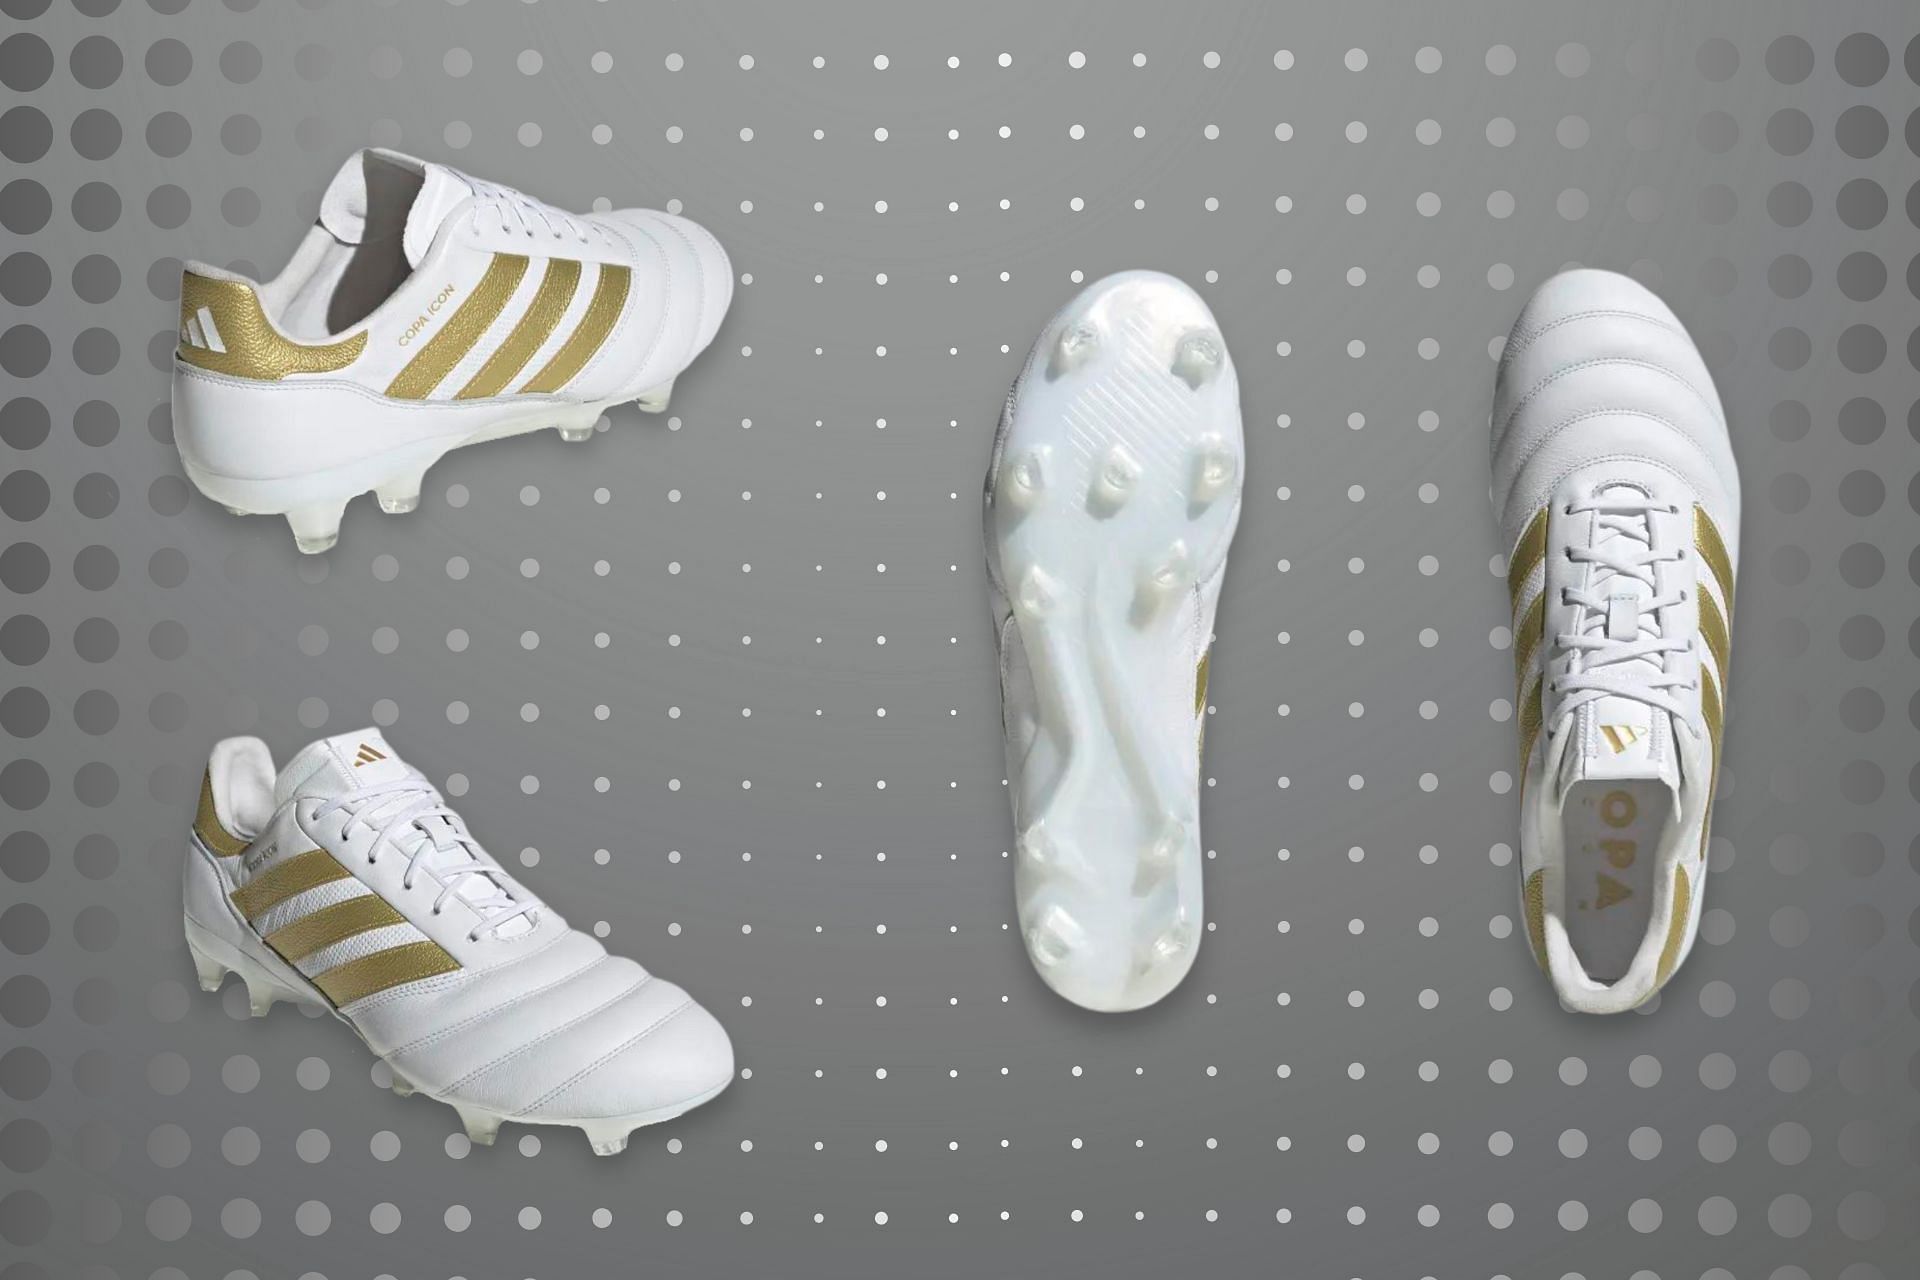 Adidas Copa Mundial .1 FG football Price, release where to buy, and more explored